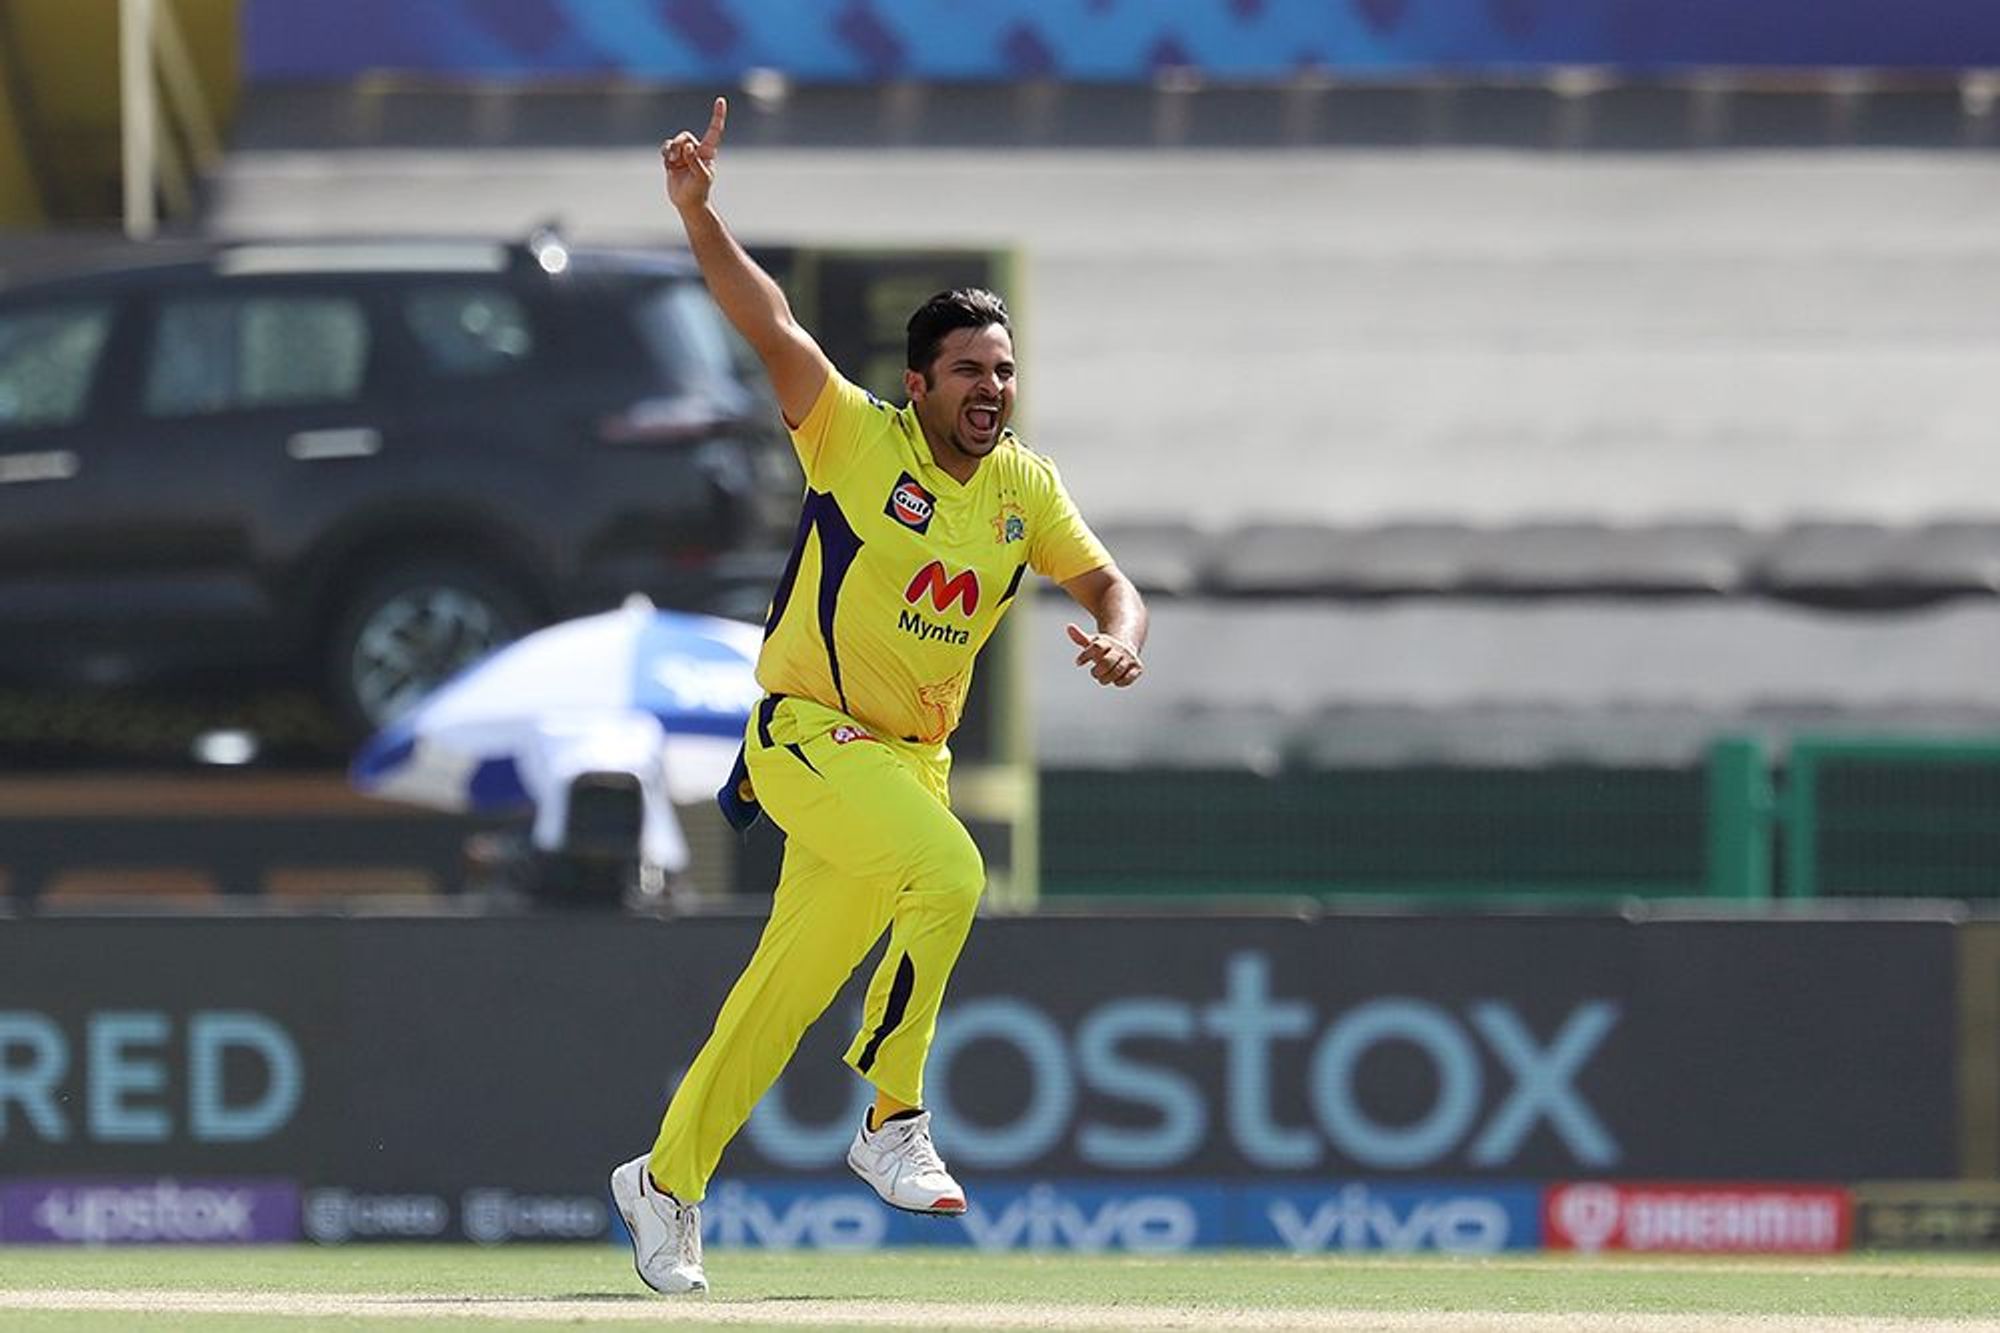 Shardul Thakur is consistently delivering for CSK in the IPL 14 | BCCI/IPL